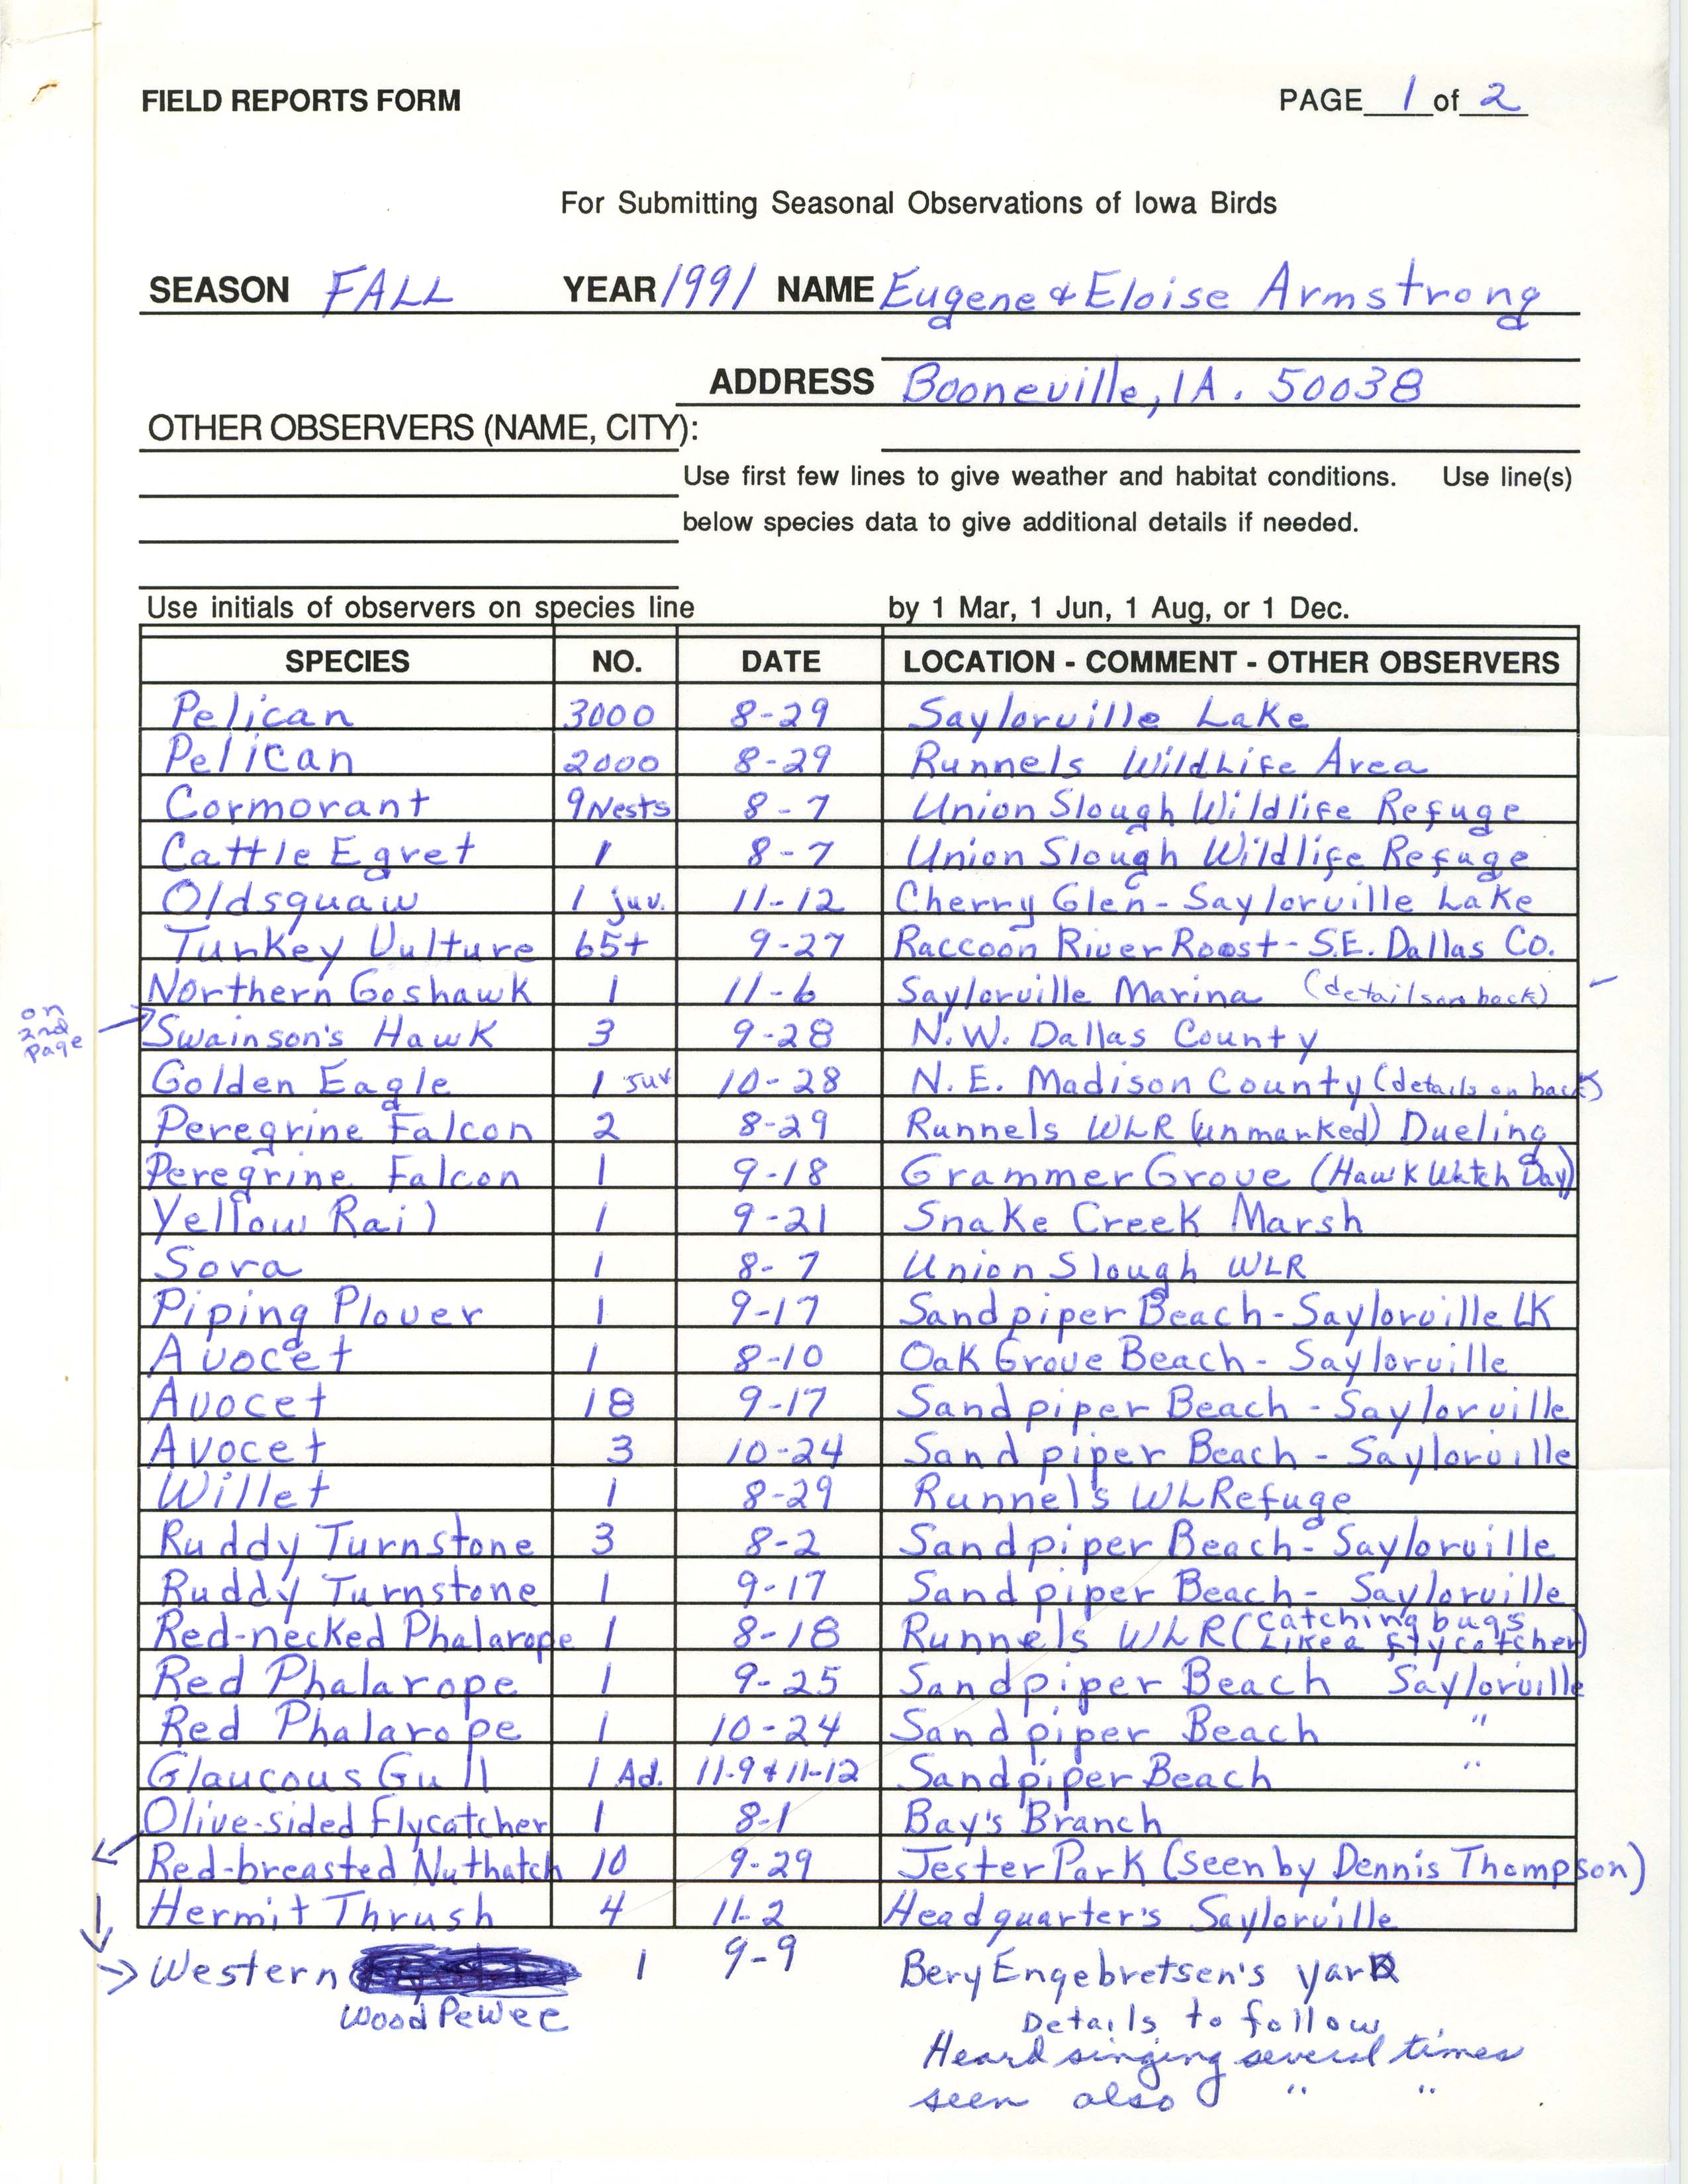 Field reports form for submitting seasonal observations of Iowa birds, Eloise Armstrong and Eugene Armstrong, fall 1991